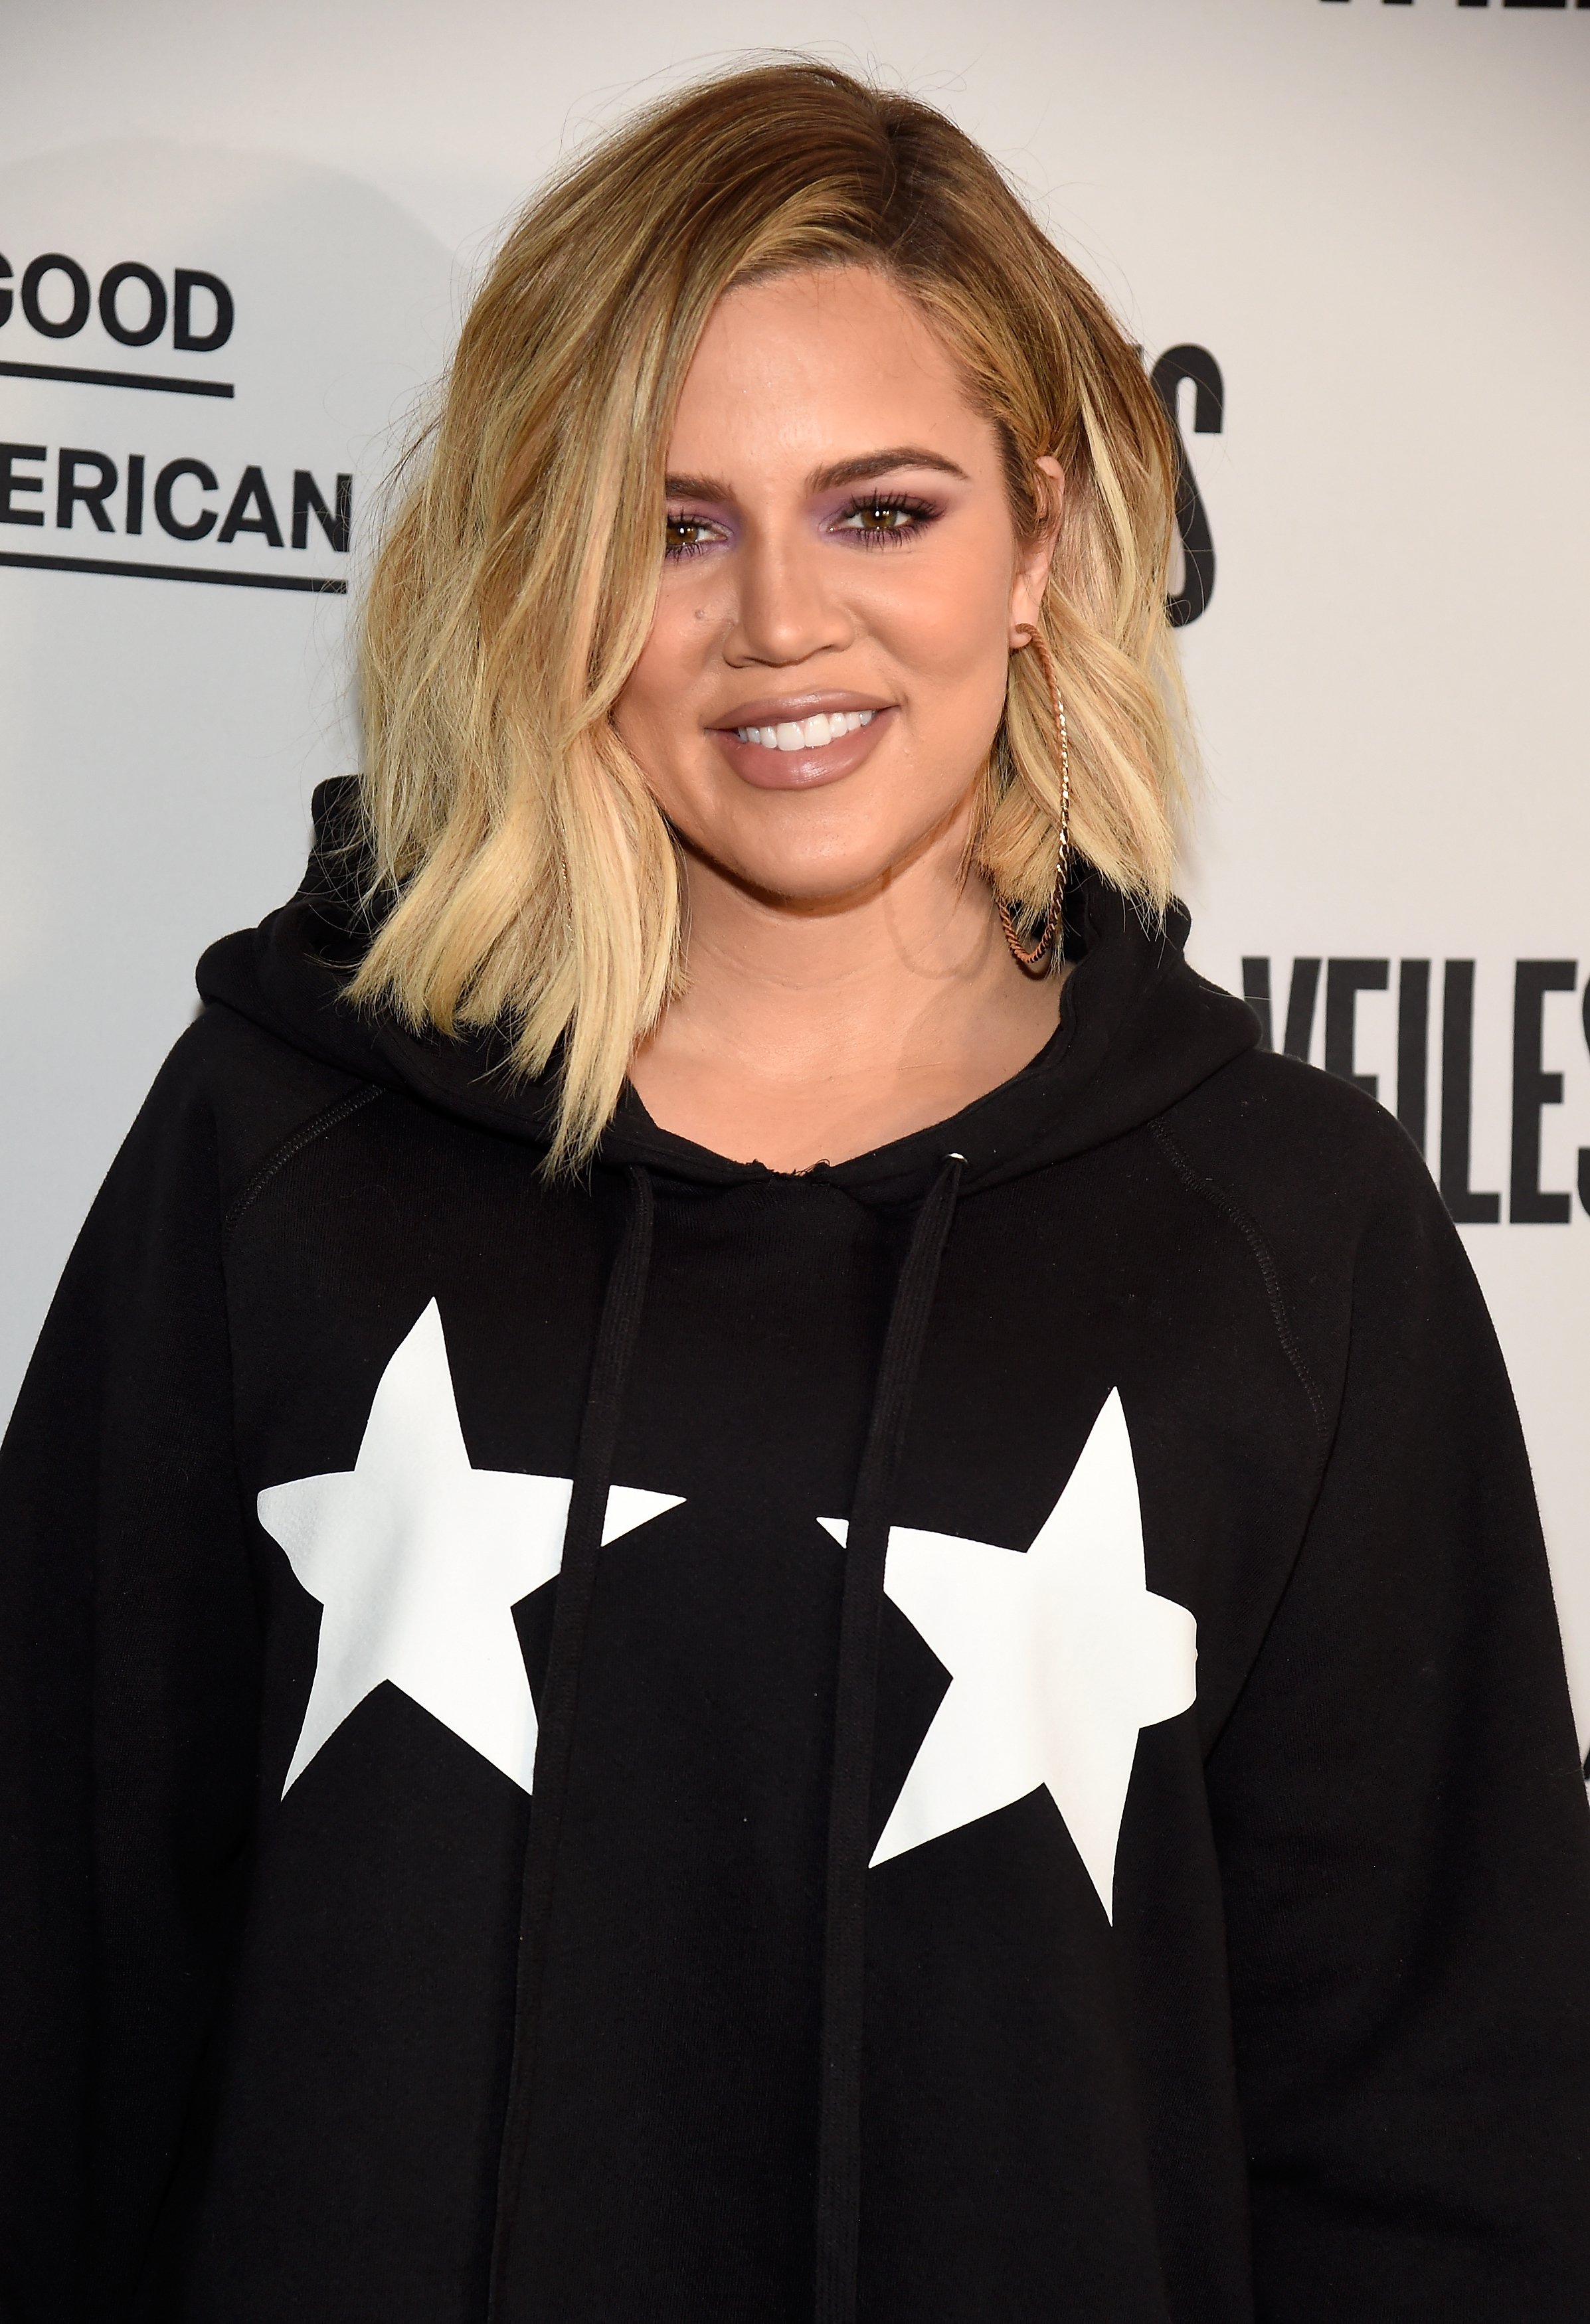 Khloe Kardashian attends an pop-up event for her Good American fashion line in October 2017. | Photo: Getty Images